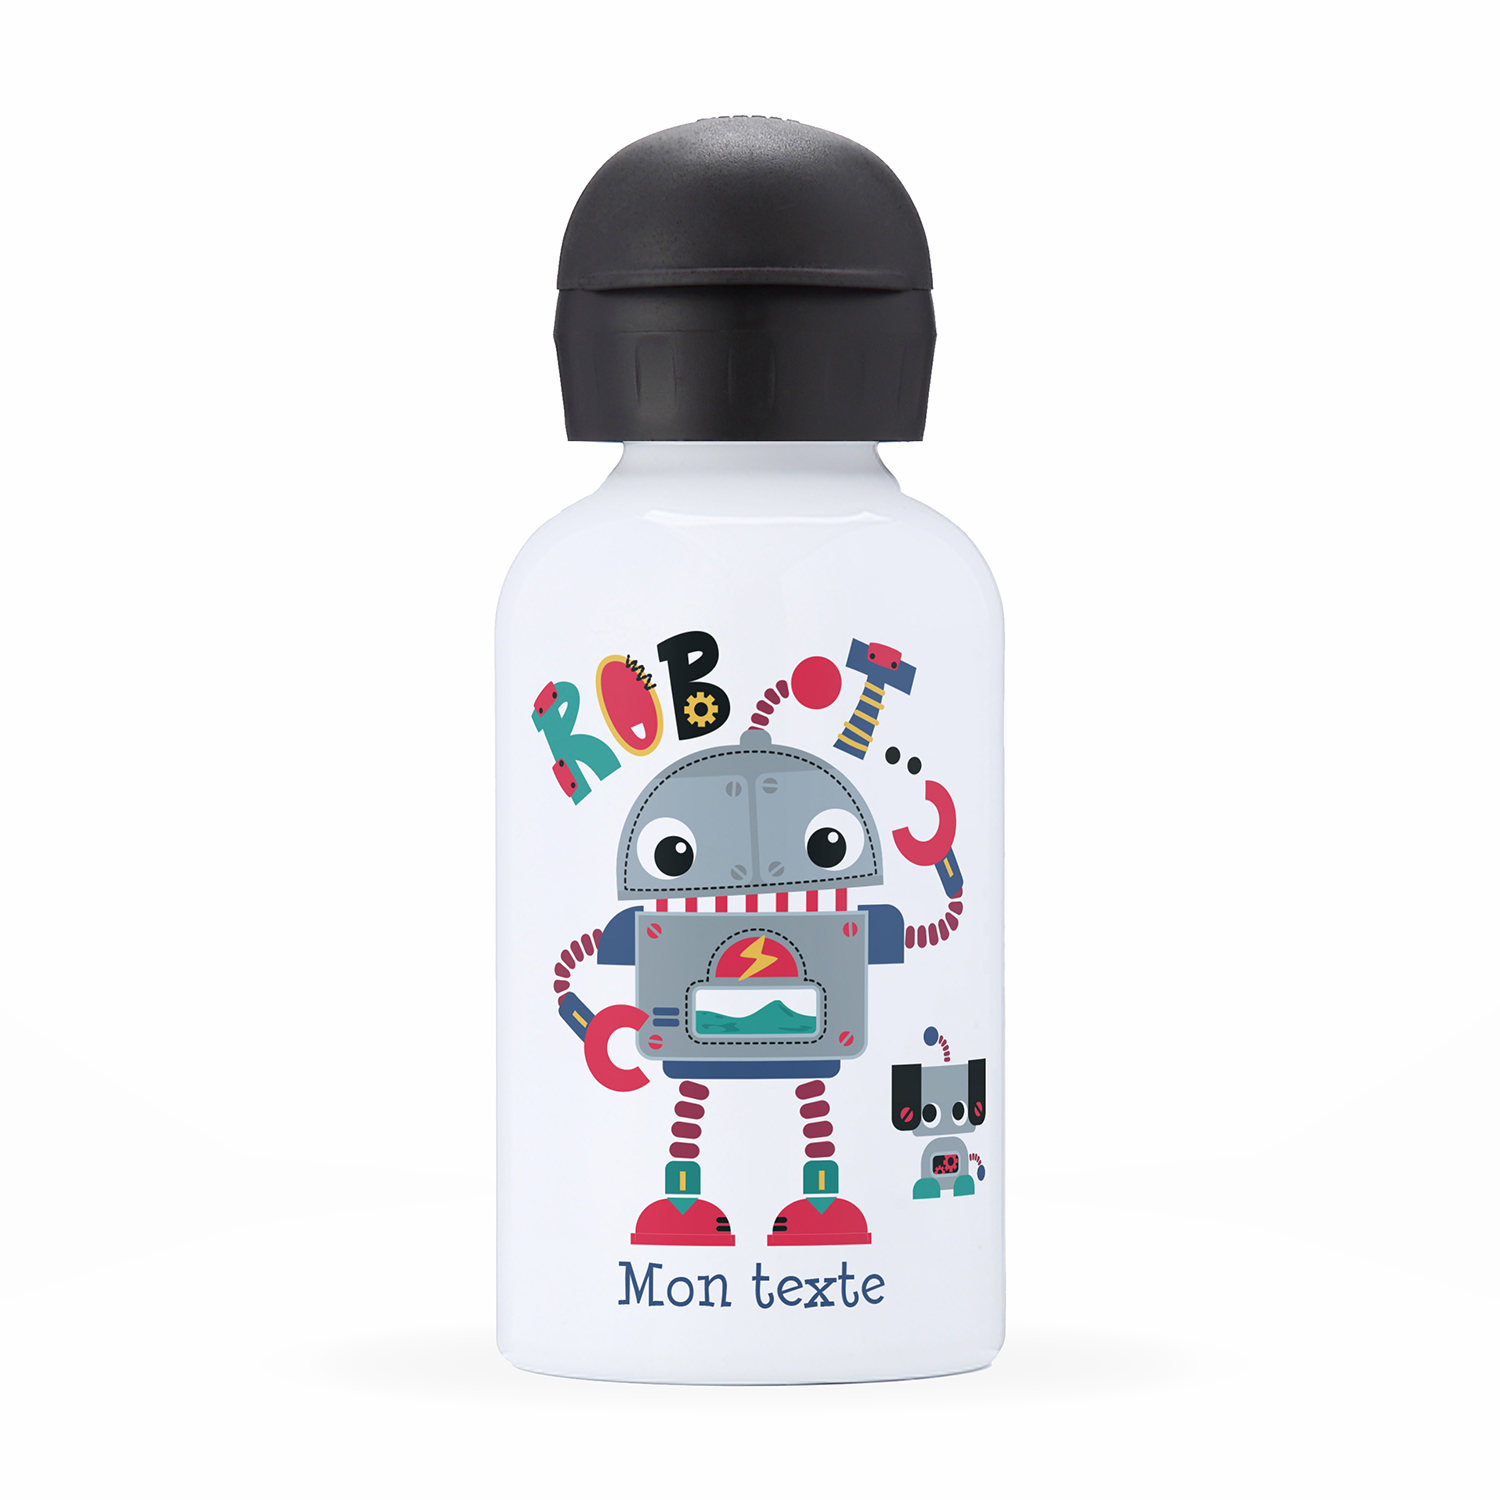 Labels Folies : Children's personalized insulated water bottle